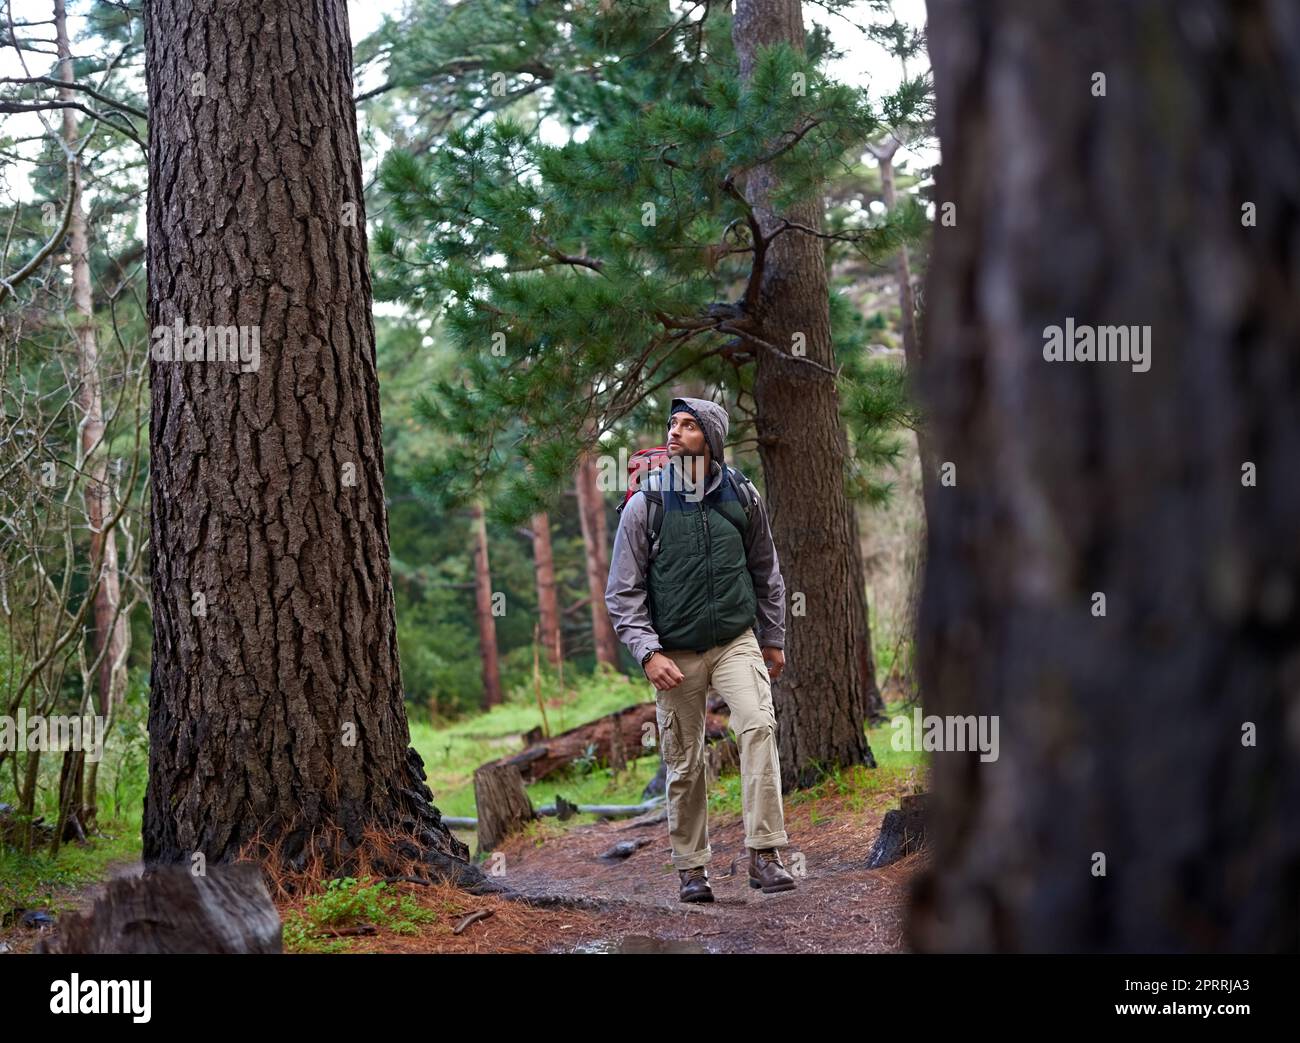 In touch with the power of nature. Full length shot of a young man wearing a backpack while hiking in the forest. Stock Photo